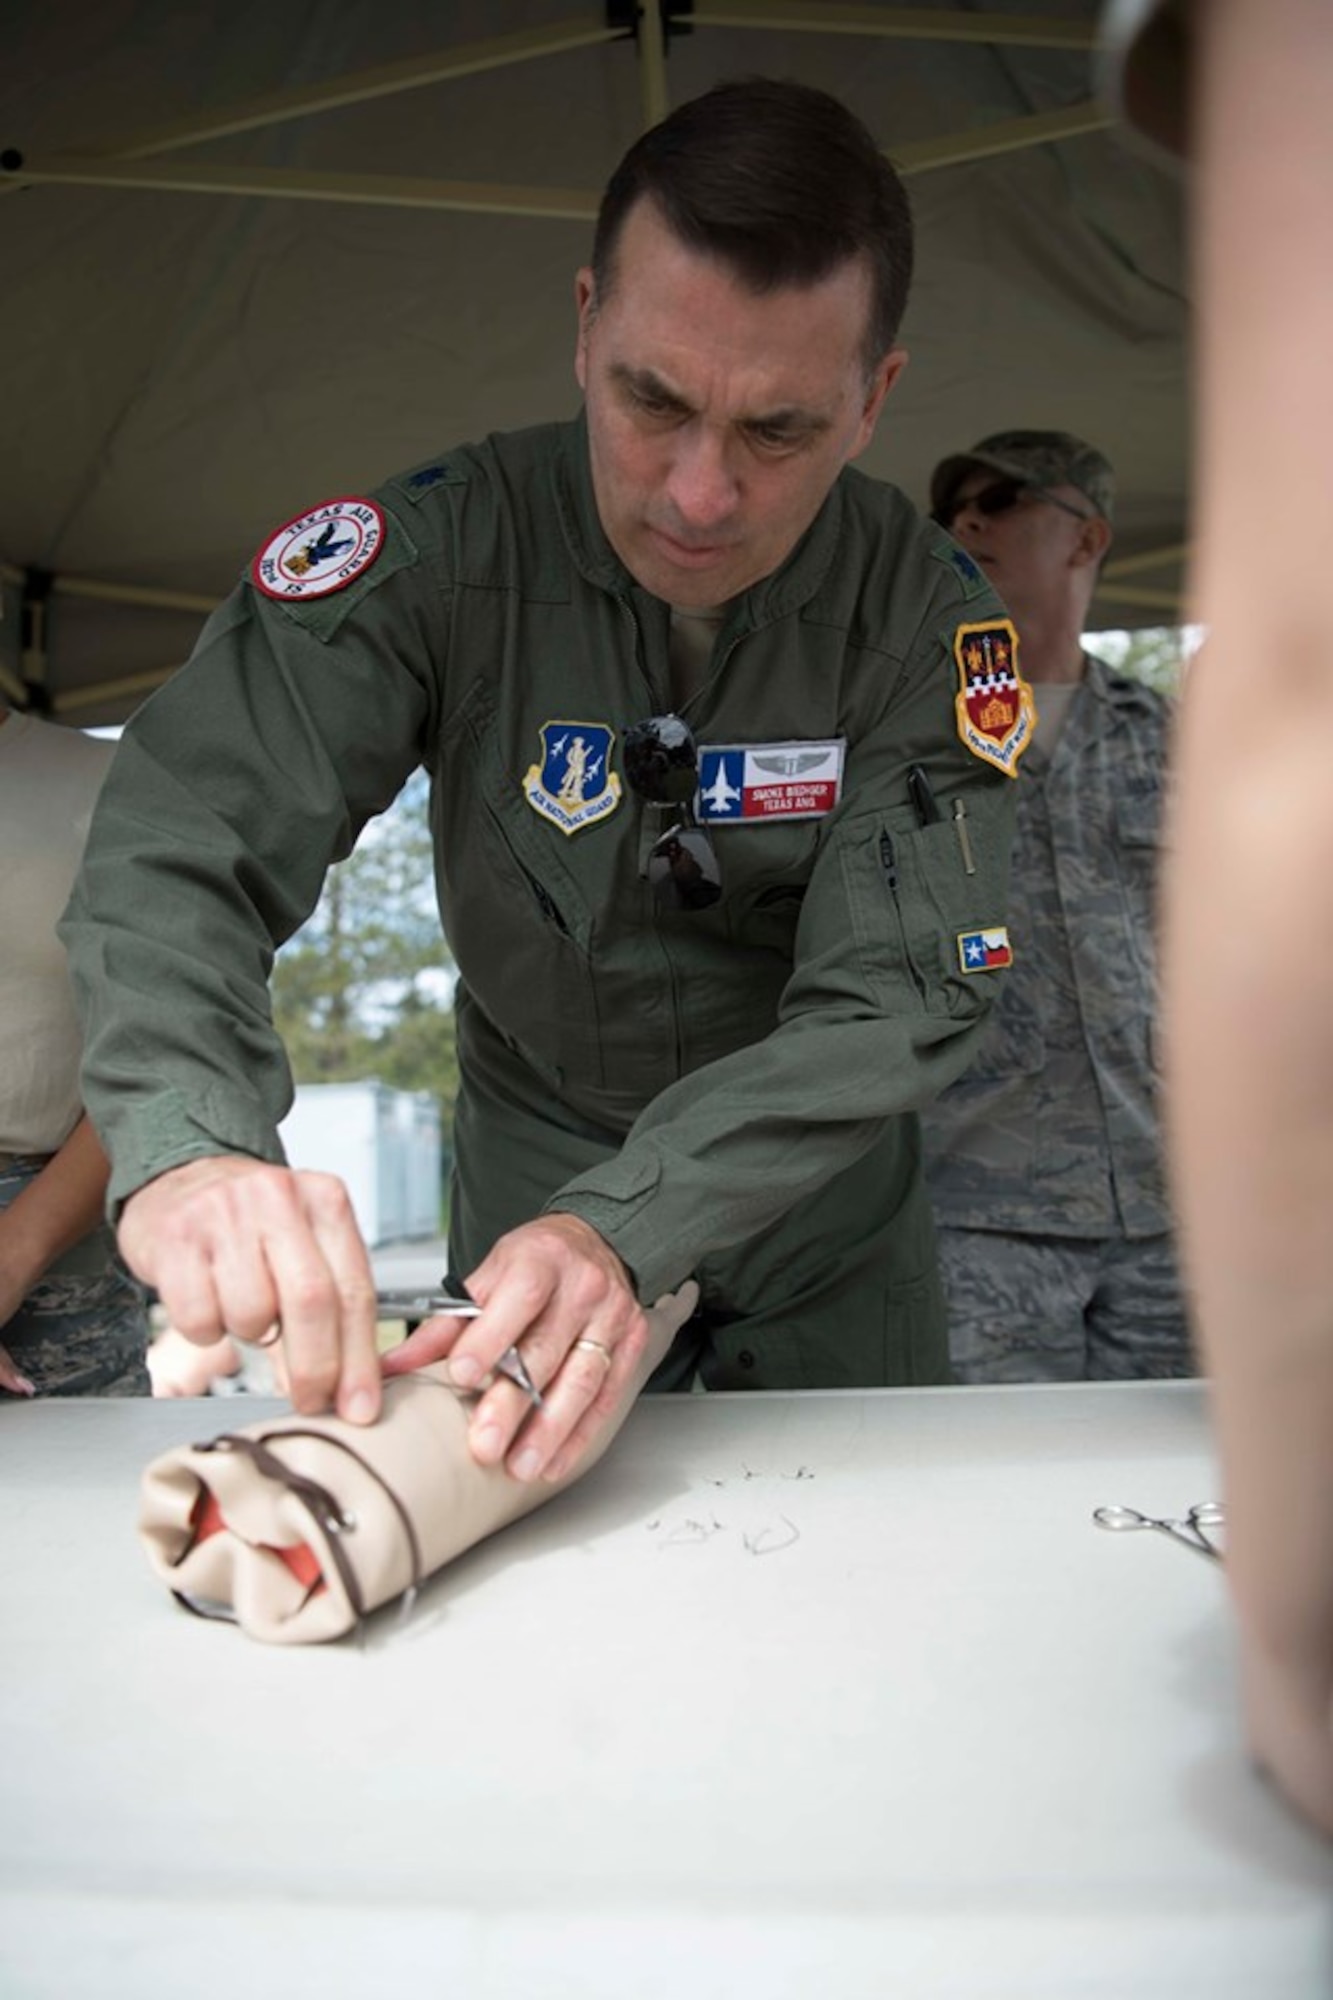 Lt. Col. Charles Biediger, a flight surgeon, assigned to the 149th Medical Group, Air National Guard, demonstrates the proper technique to suture a patient during a training exercise at Coast Guard Station Lake Tahoe, Nevada, June 16, 2019.